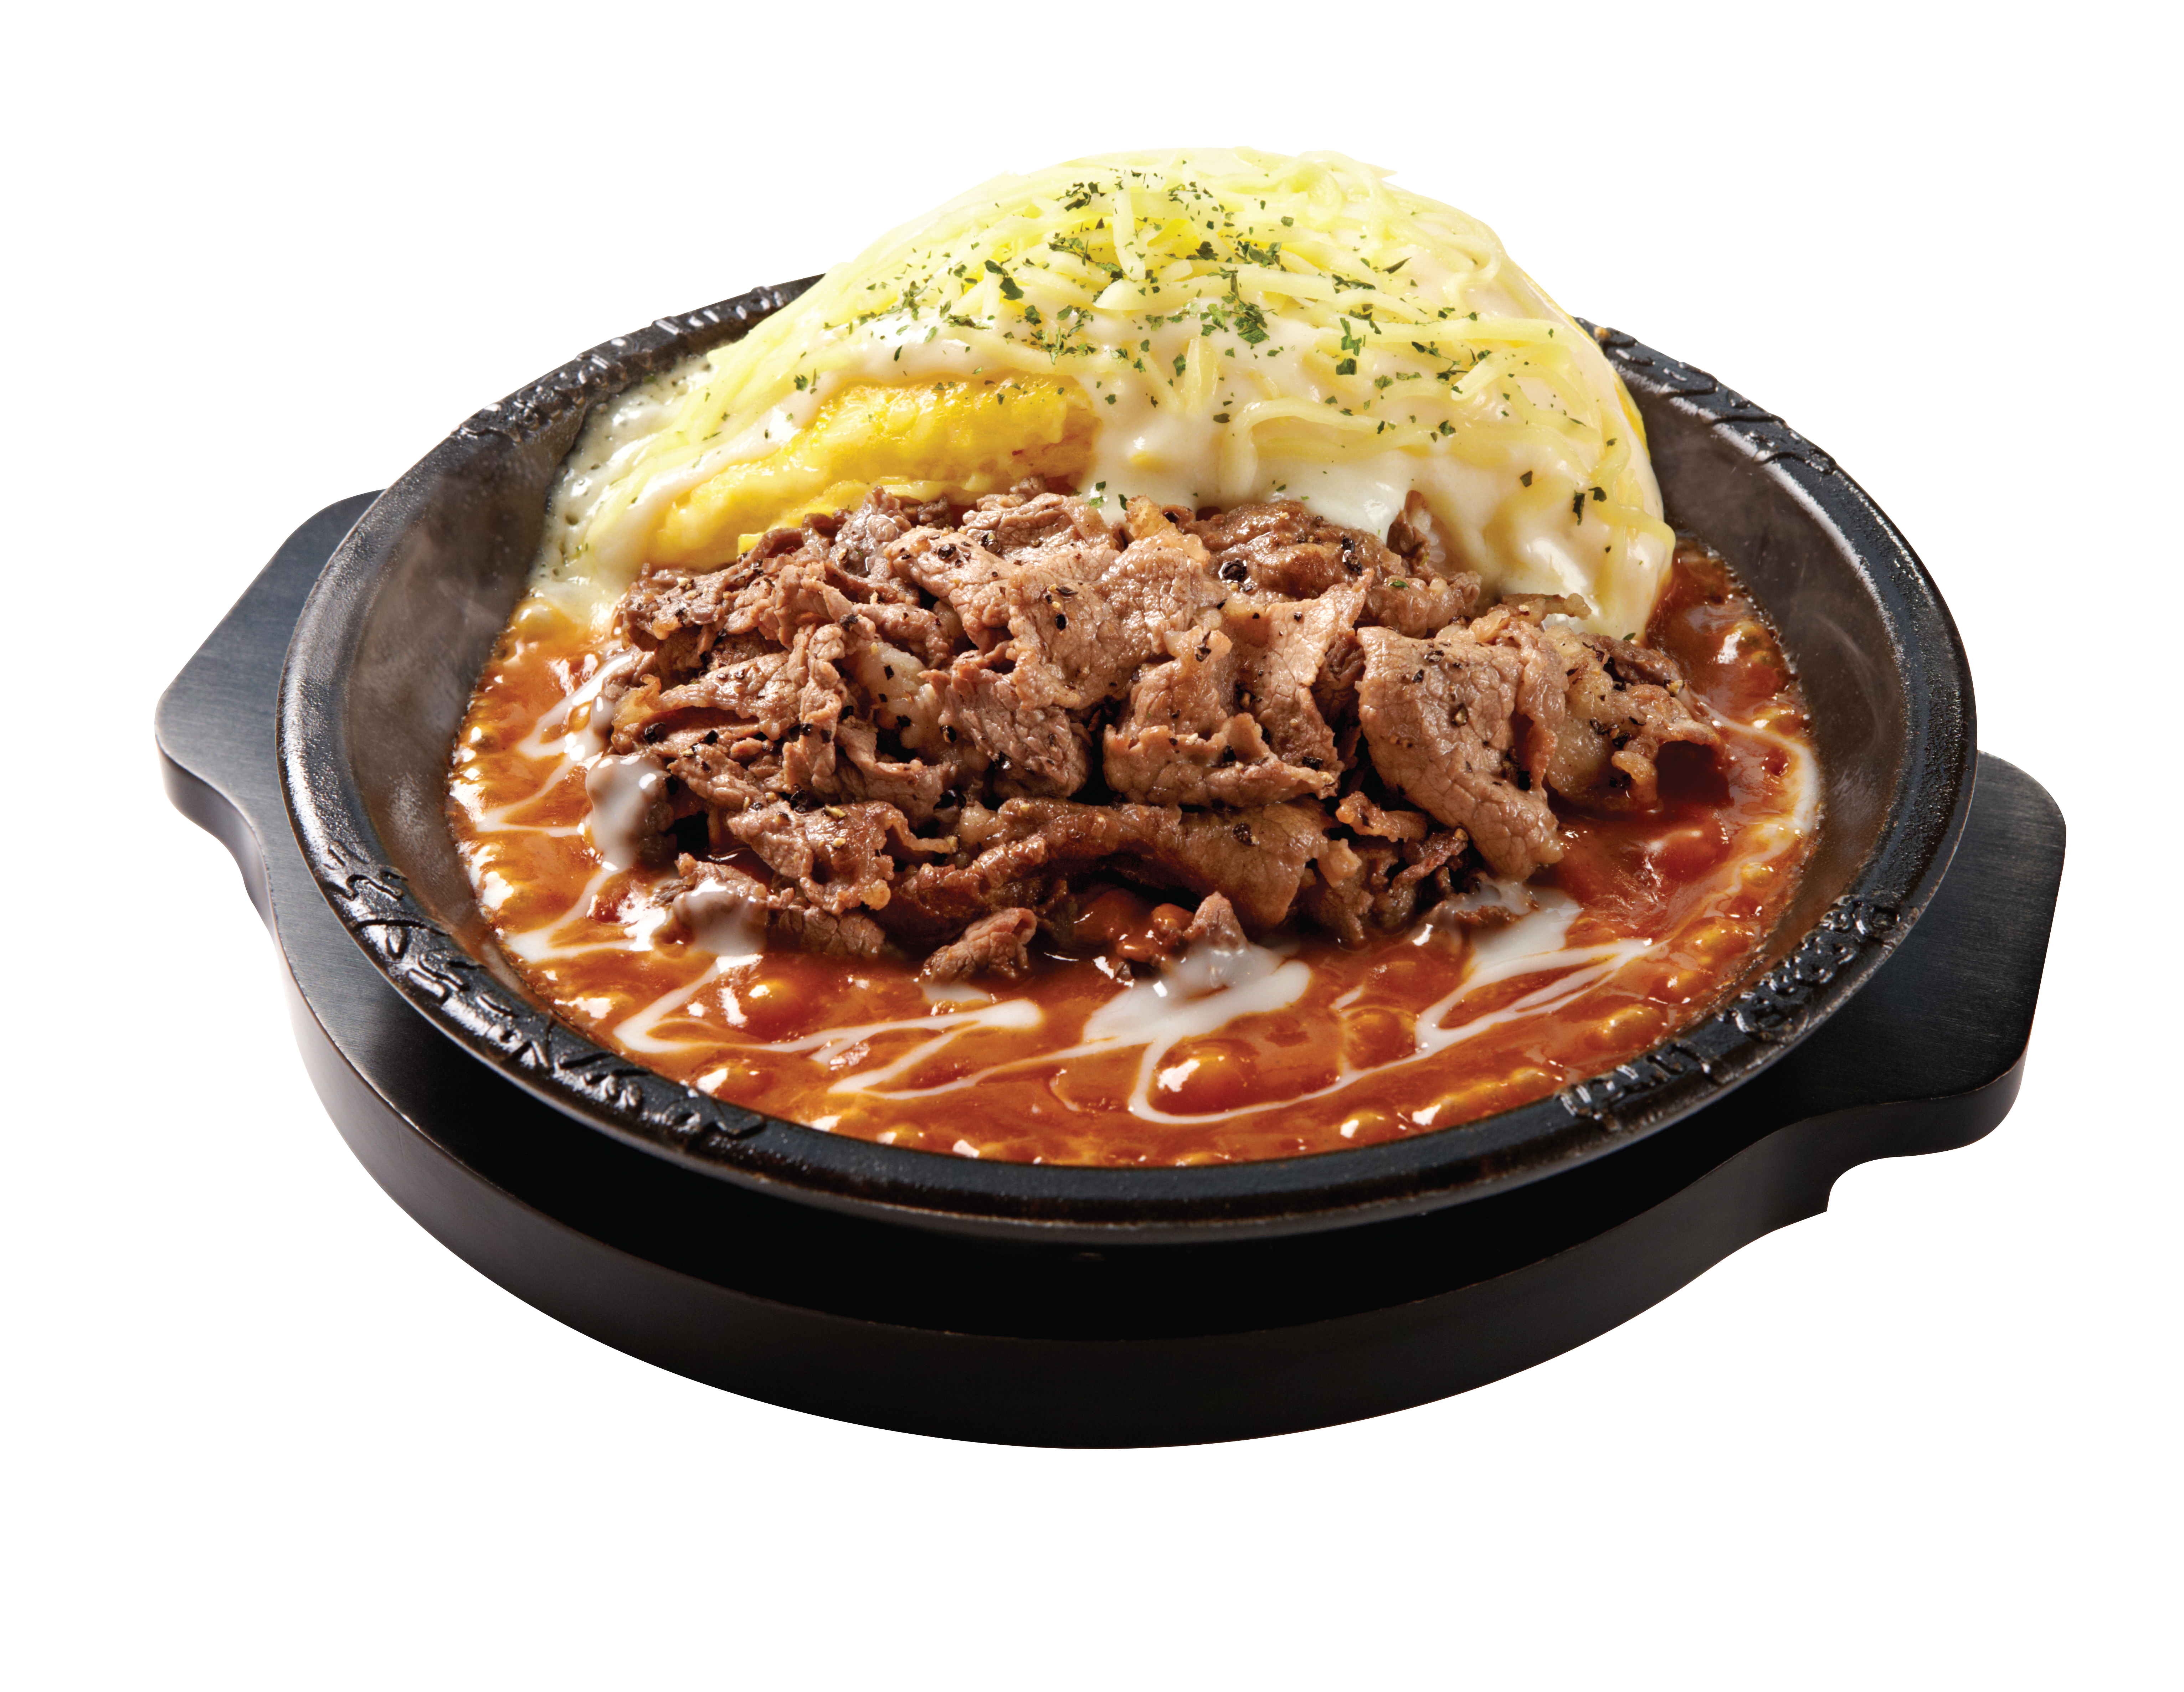 24.Cheesy Omlelette with Beef